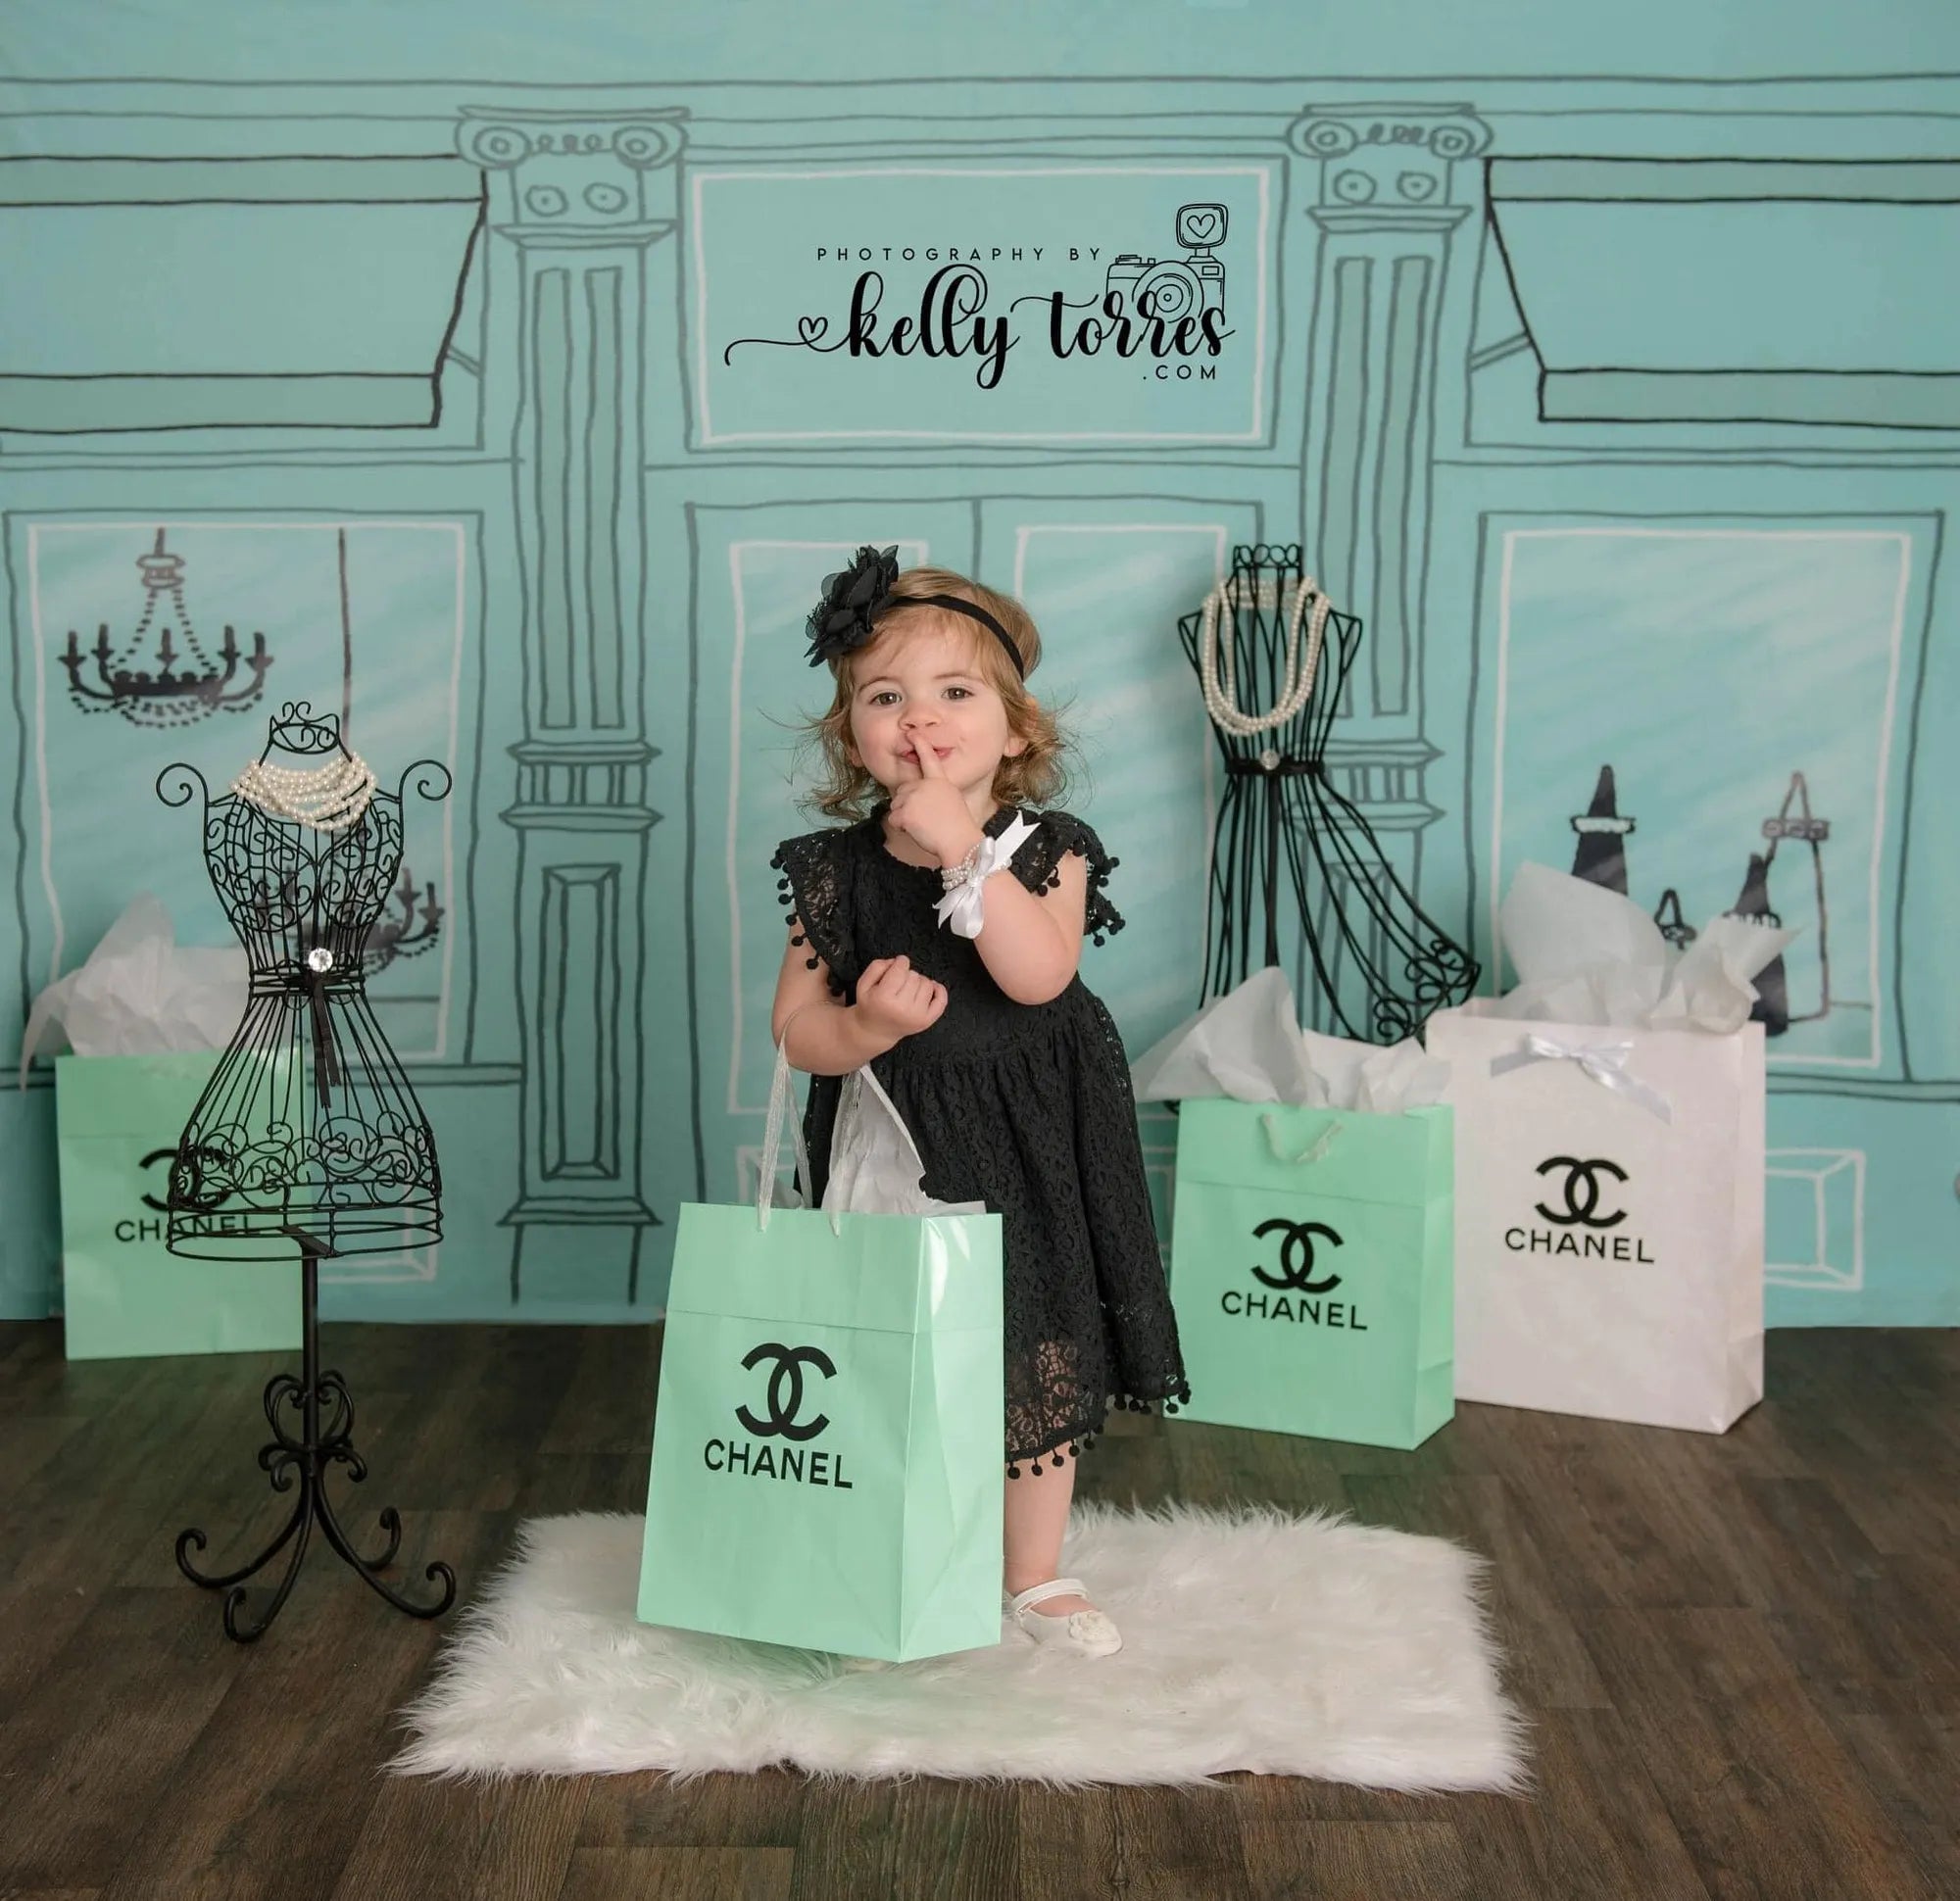 Kate Shopping Spree Storefront Backdrop Designed by Mandy Ringe Photography(only ship to Canada)